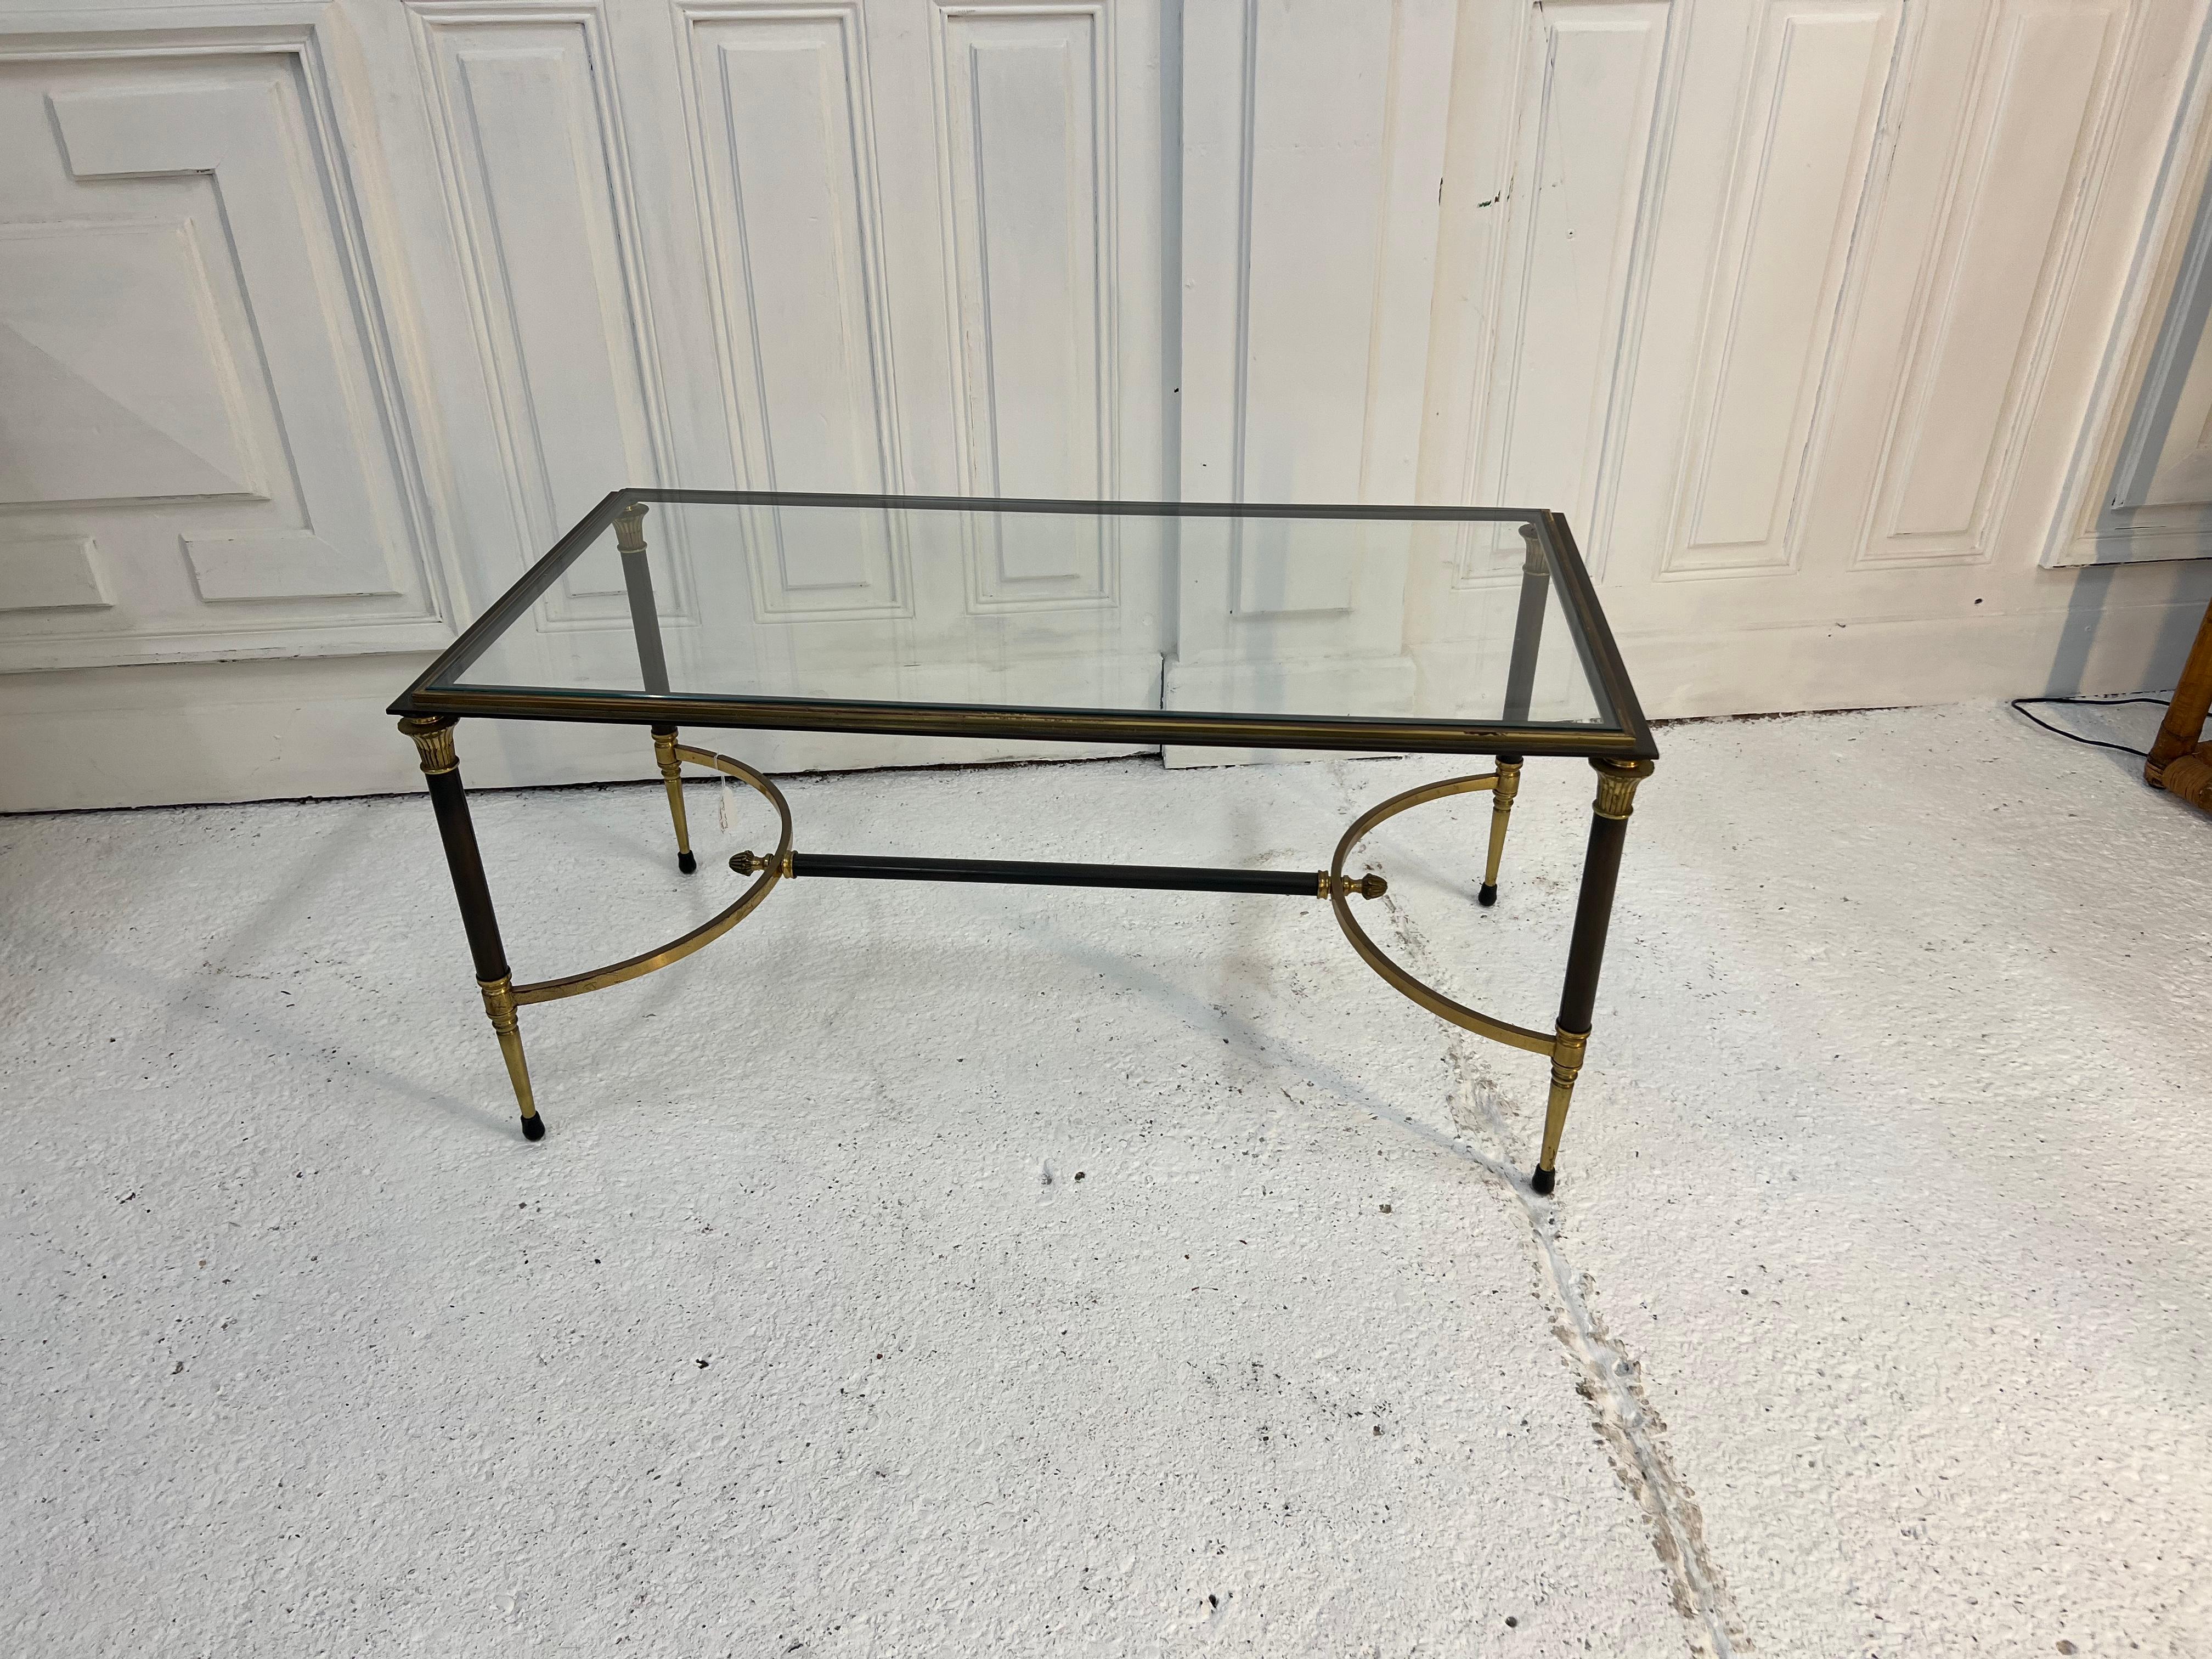 magnificent two-tone bronze coffee table (golden and gunmetal) from Maison Charles
the edition is typical of the 1950s, its beveled glass top gives it its very Frenchie look


The year 1959 marked a turning point in the history of the house.